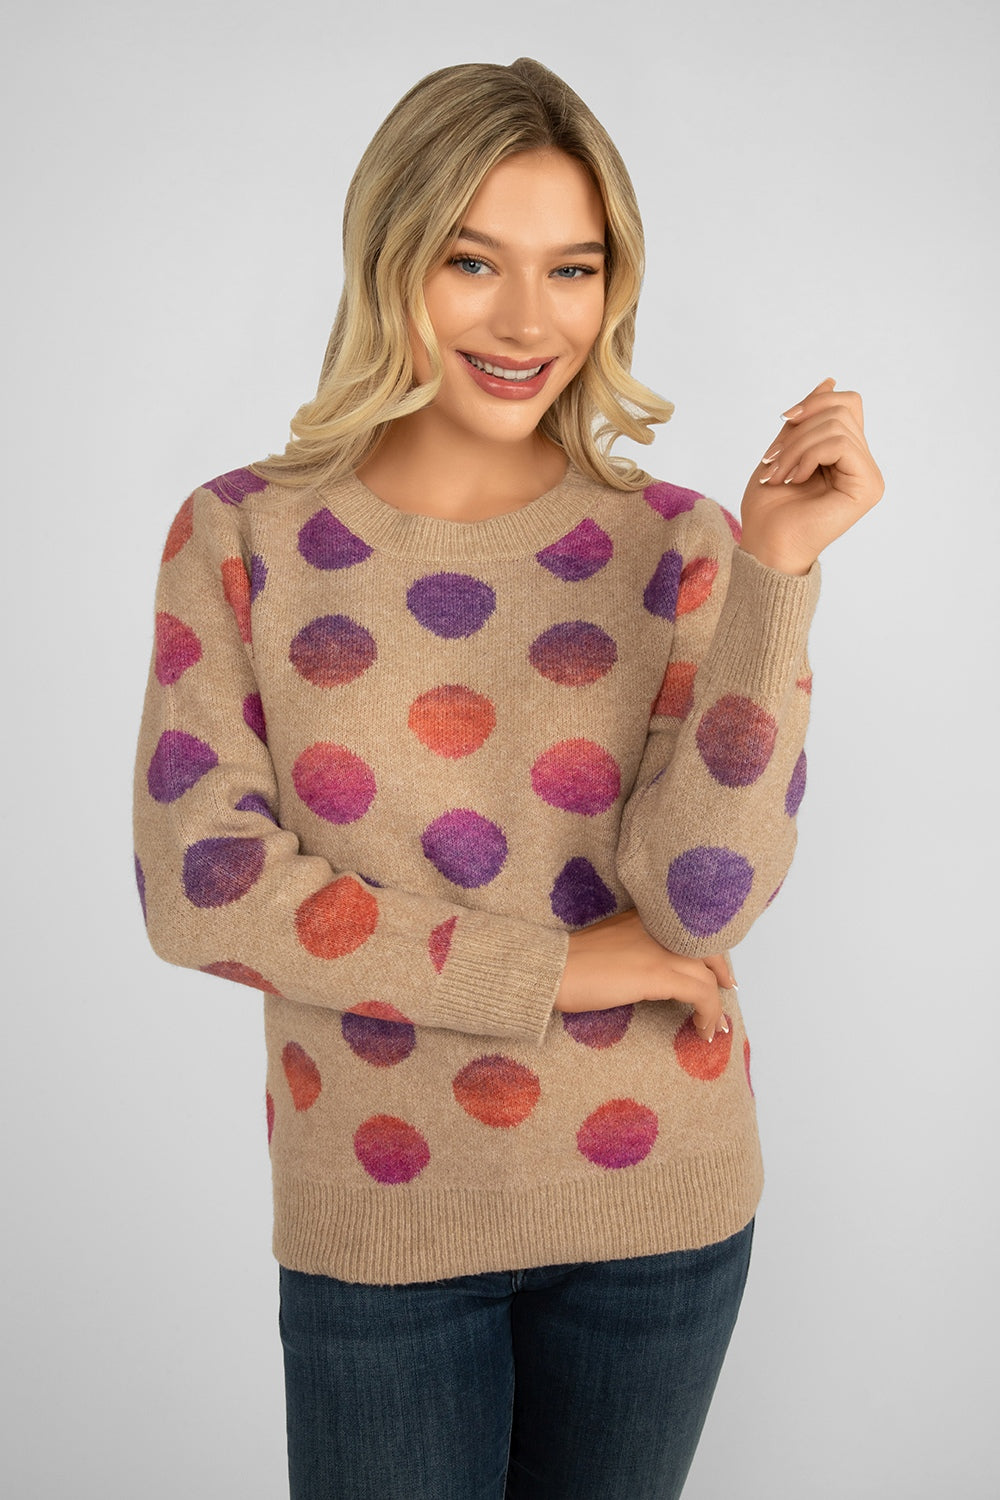 Women's Clothing EVIDENCE (91717) Polka Dot Sweater in MULTICIRCLES